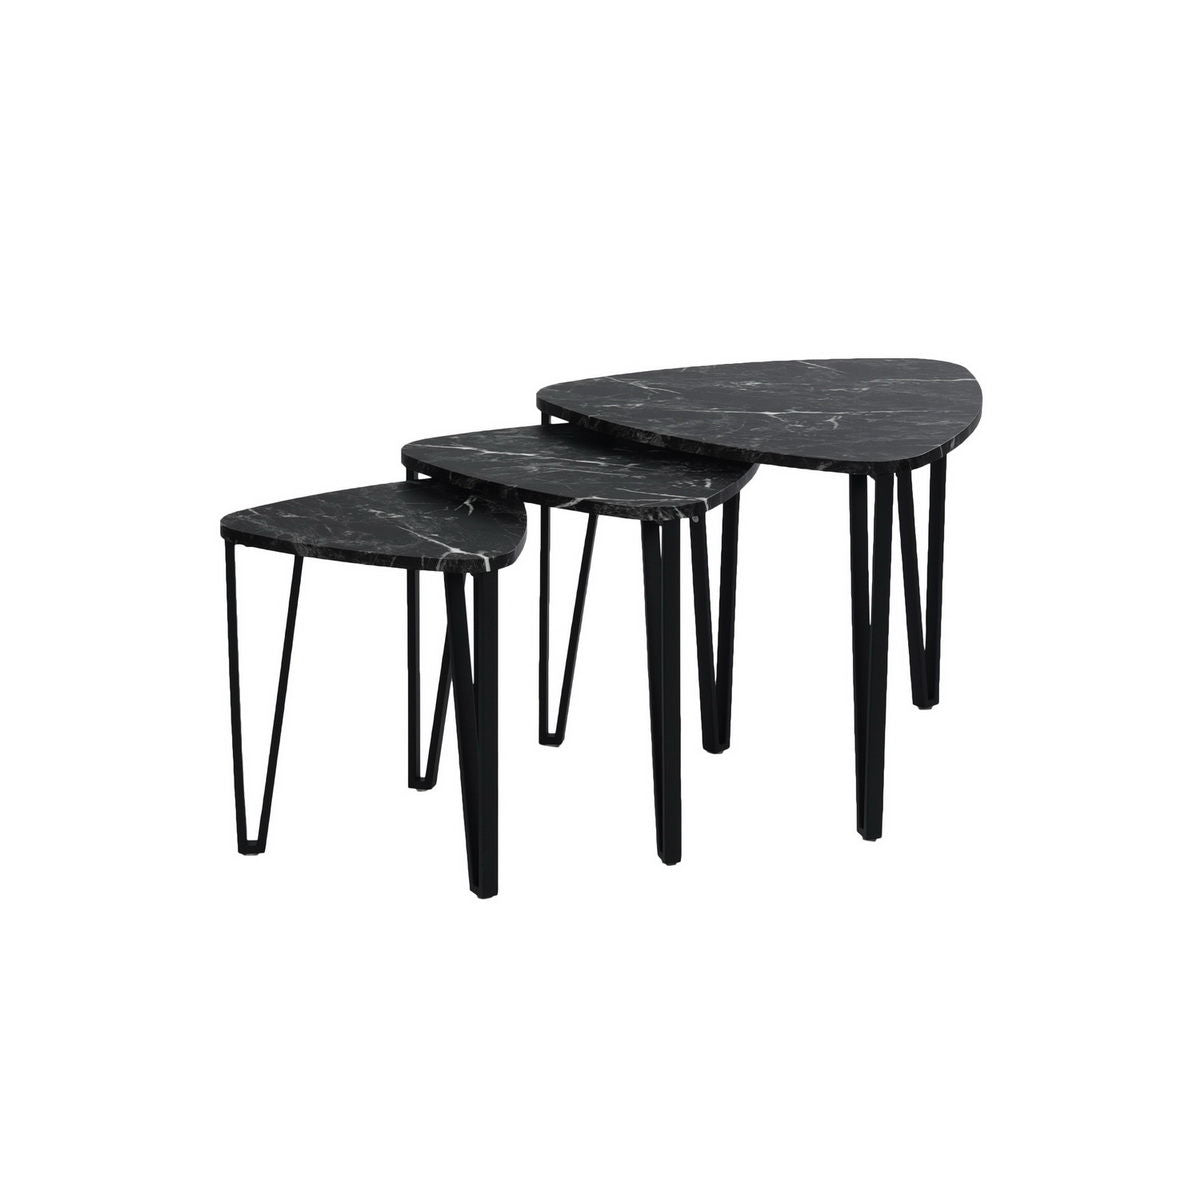 Nesting Coffee Table (Set of 3) End Tables For Living Room, Stacking Side Tables, Wood Look Accent Furniture With Metal Frame - Black Marble